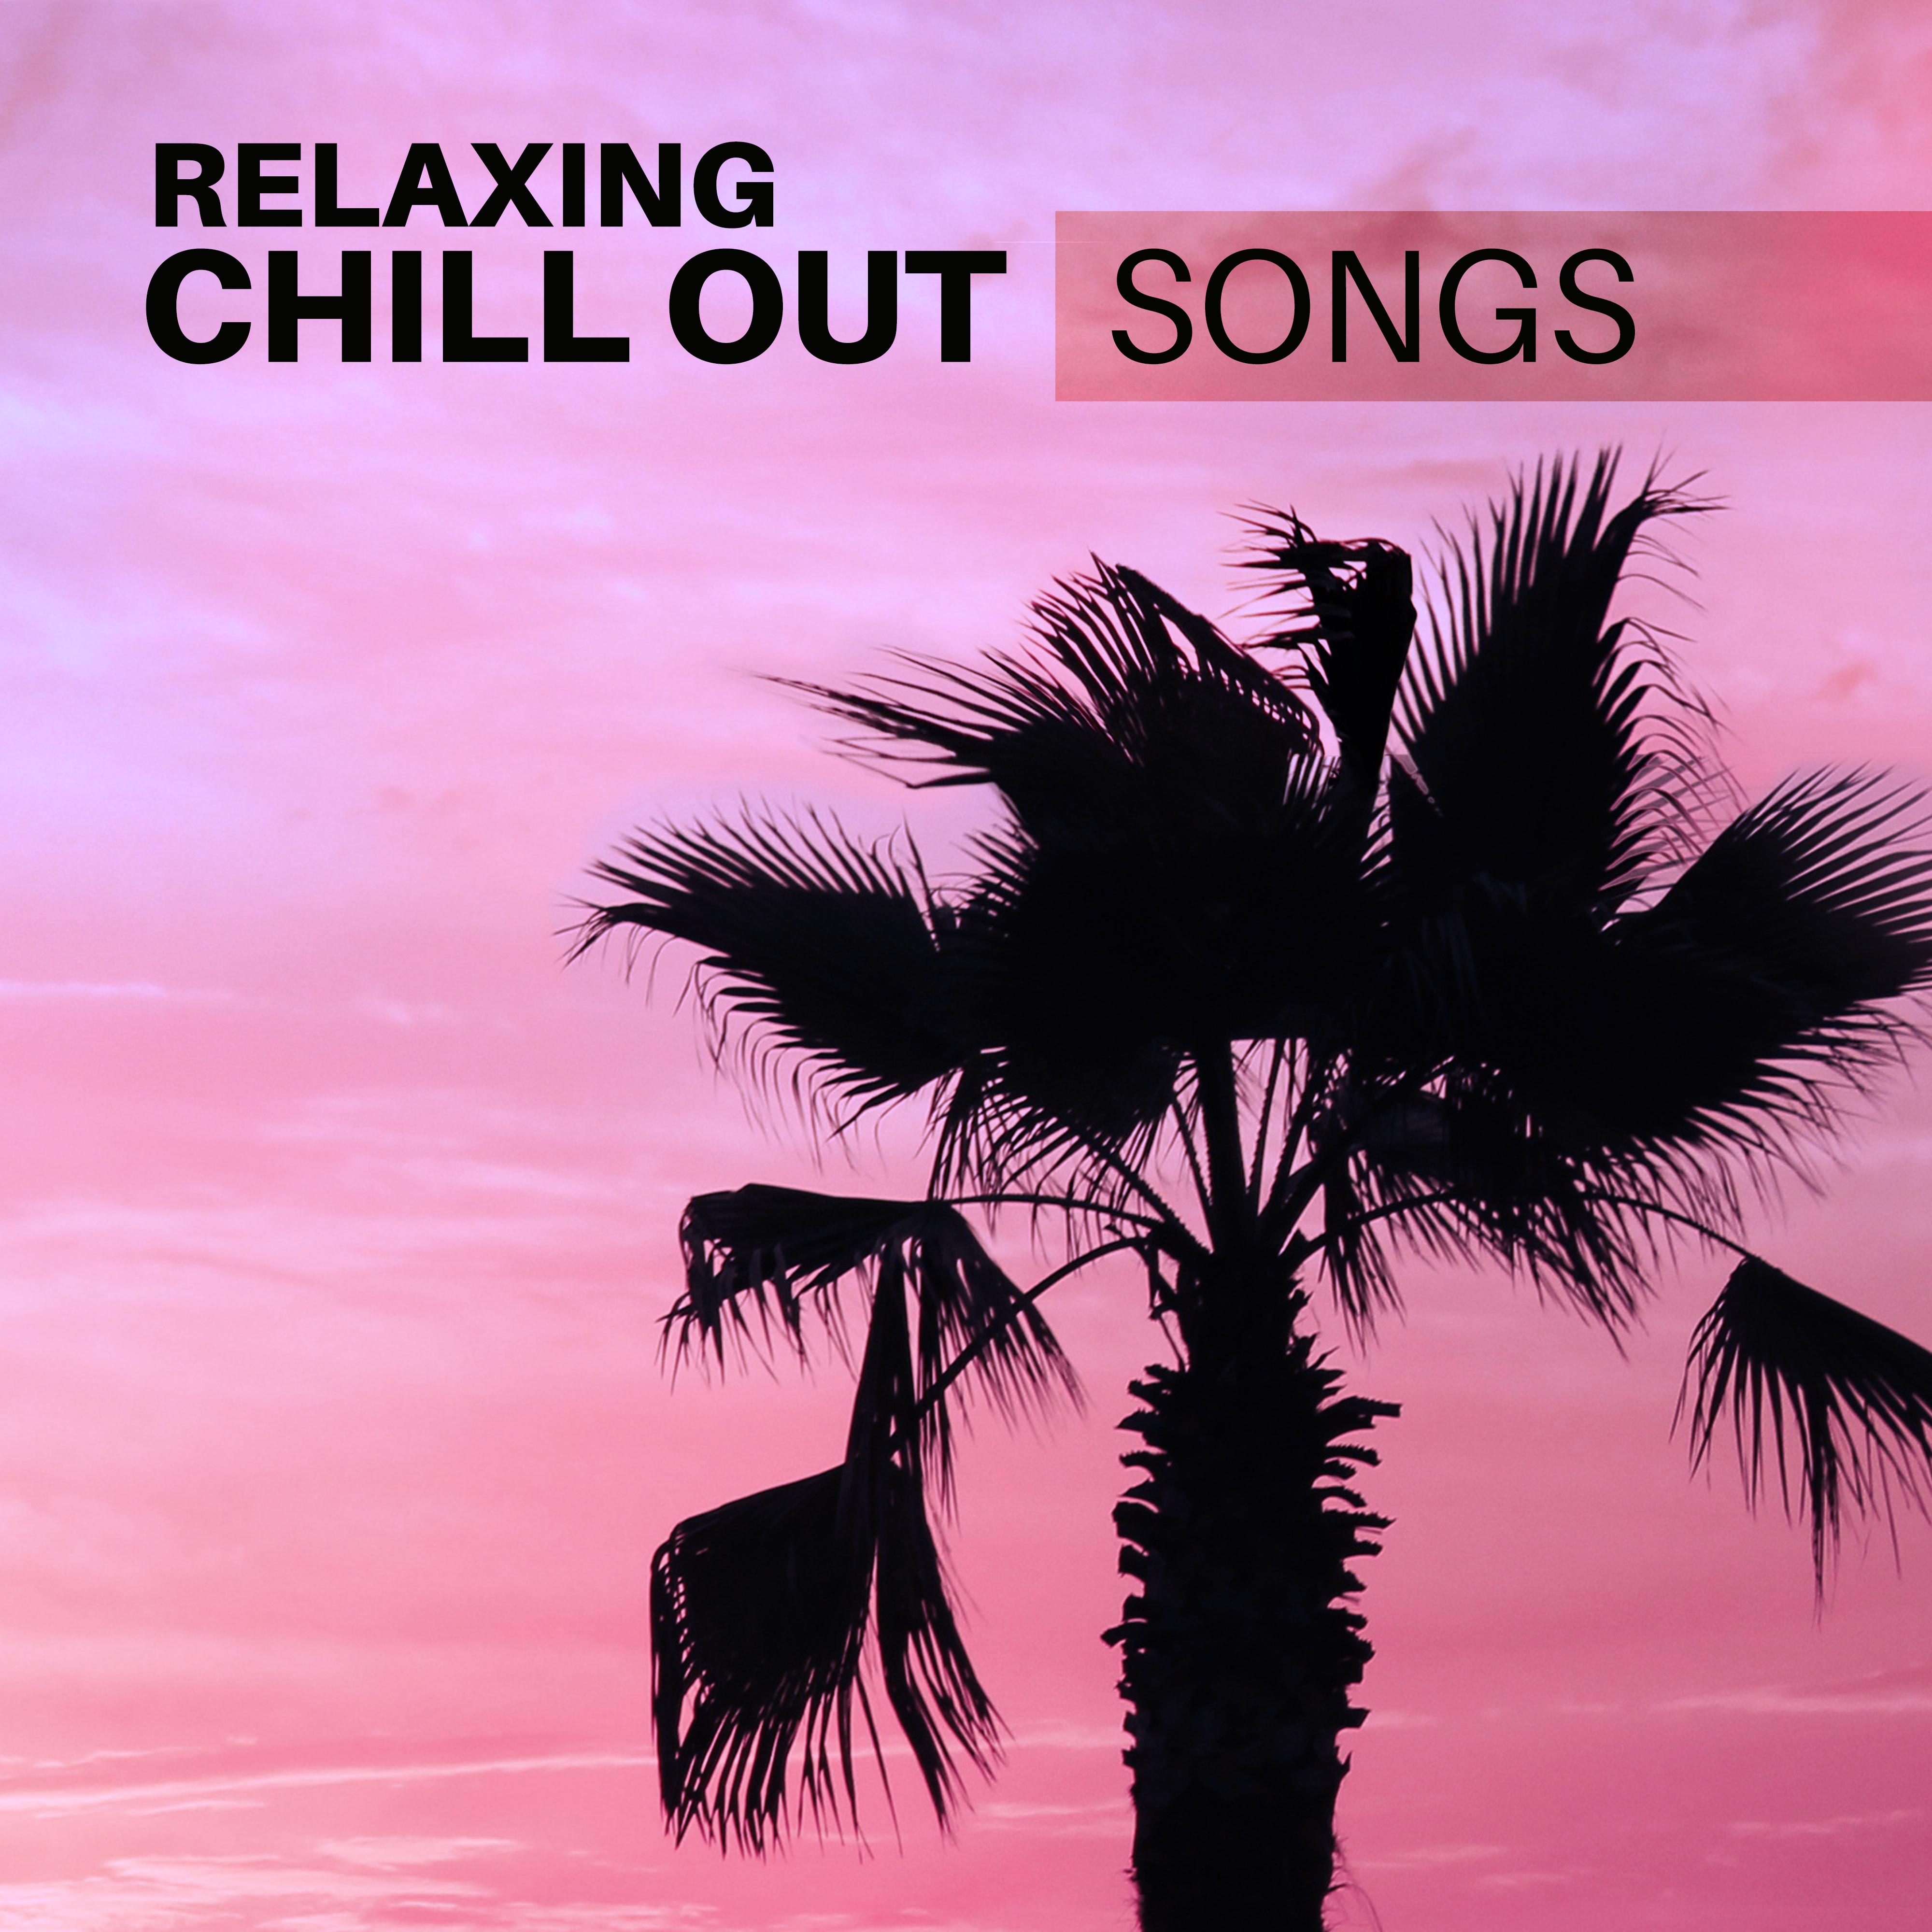 Relaxing Chill Out Songs – Summer Vibes, Waves of Calmness, Soothing Beach Music